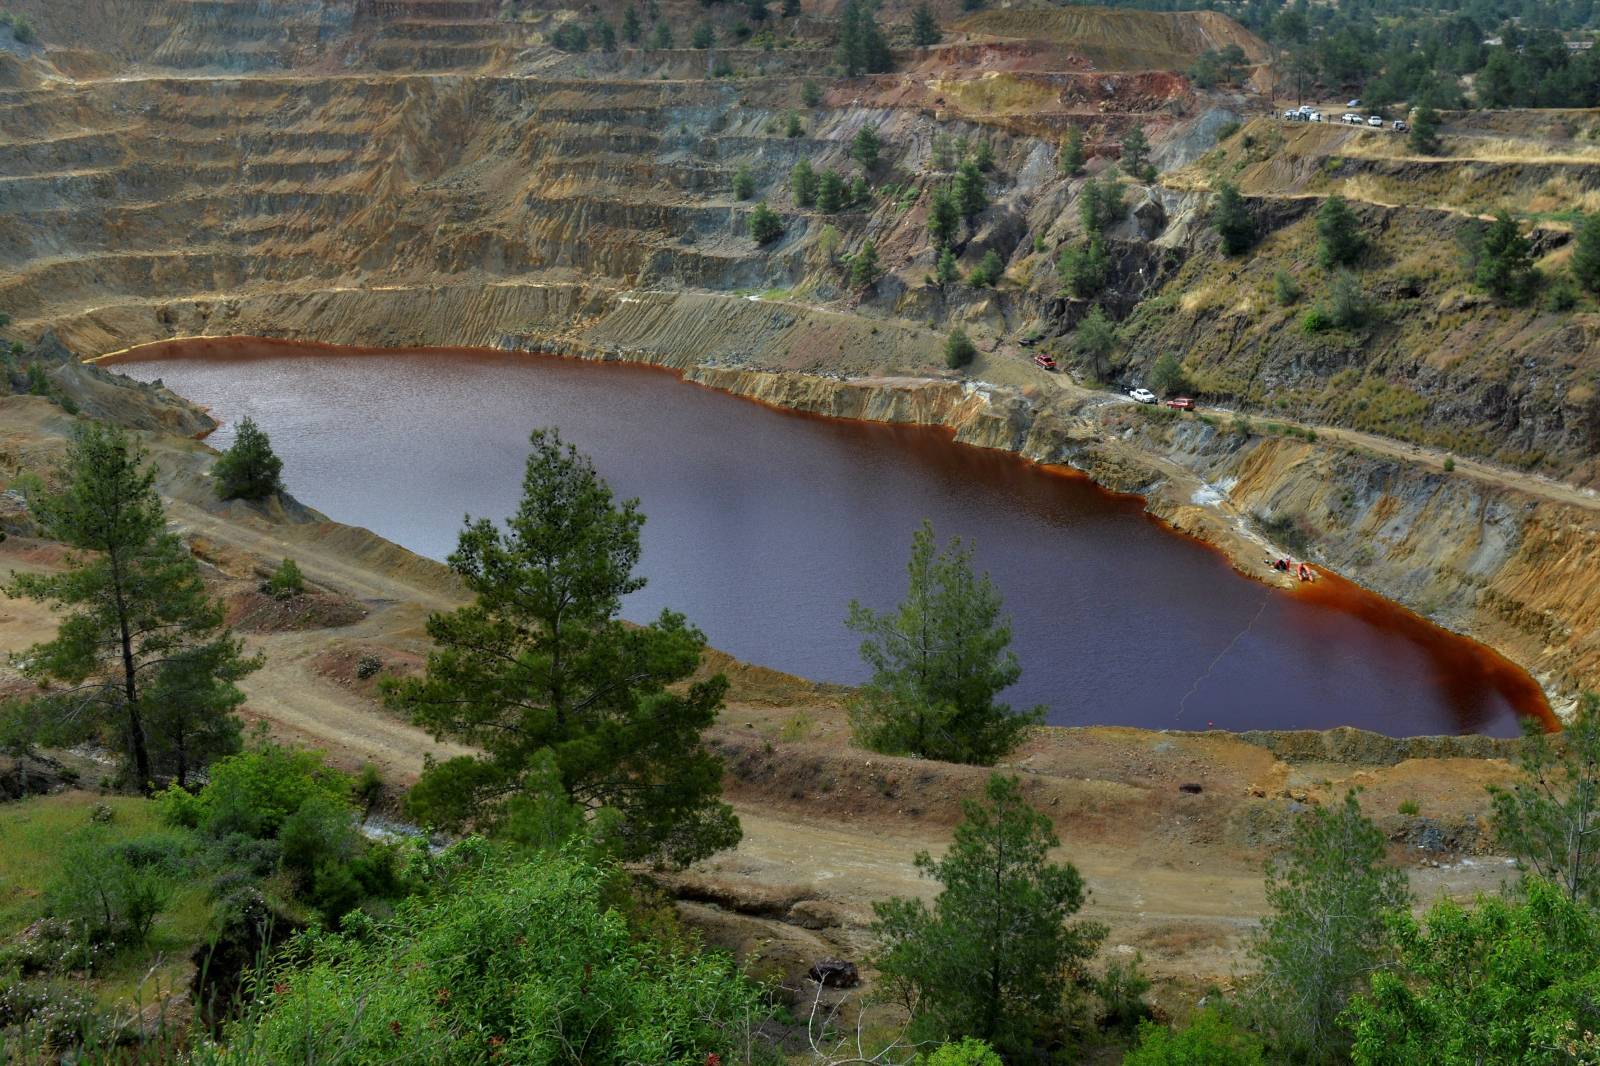 View of Kokkinopezoula lake, also known as "red lake" where forensics officers search for possible bodies of victims of a suspected serial killer, near the village of Mitsero